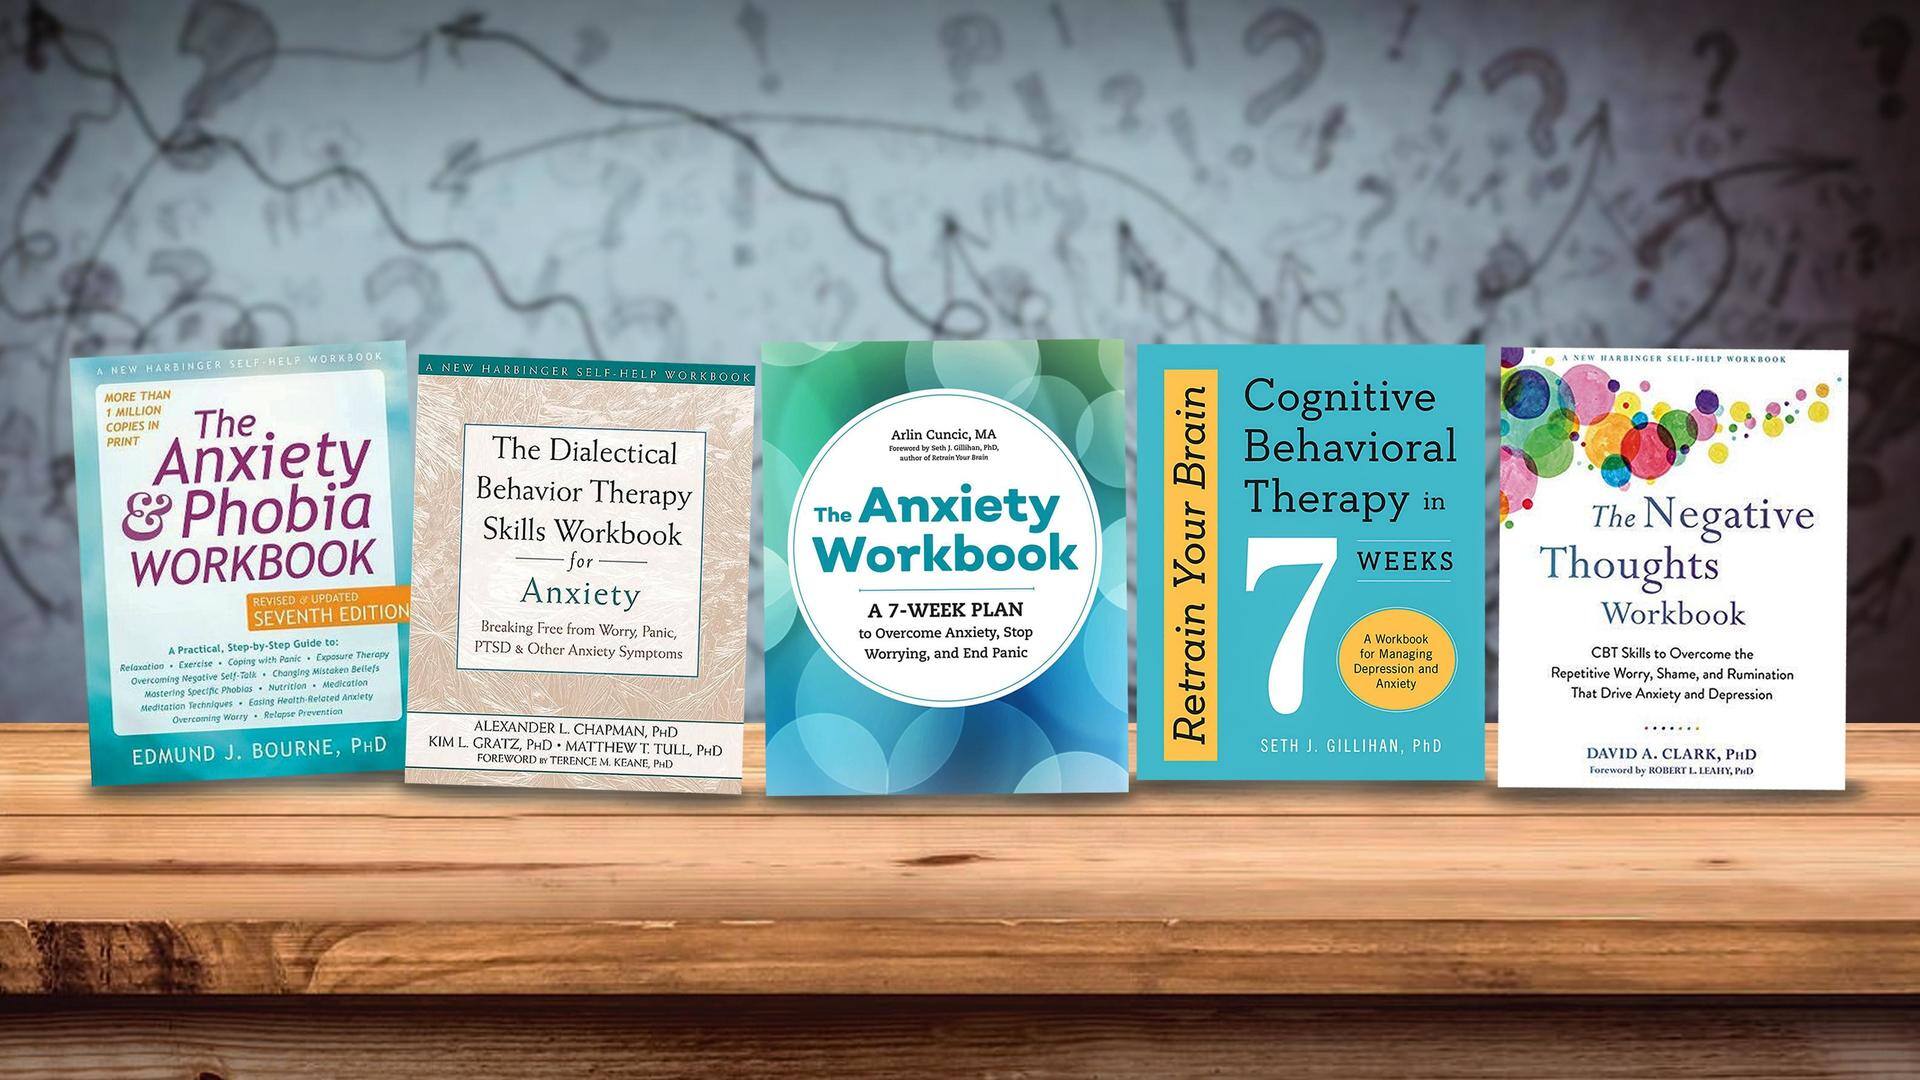 These workbooks can help you work on your anxiety